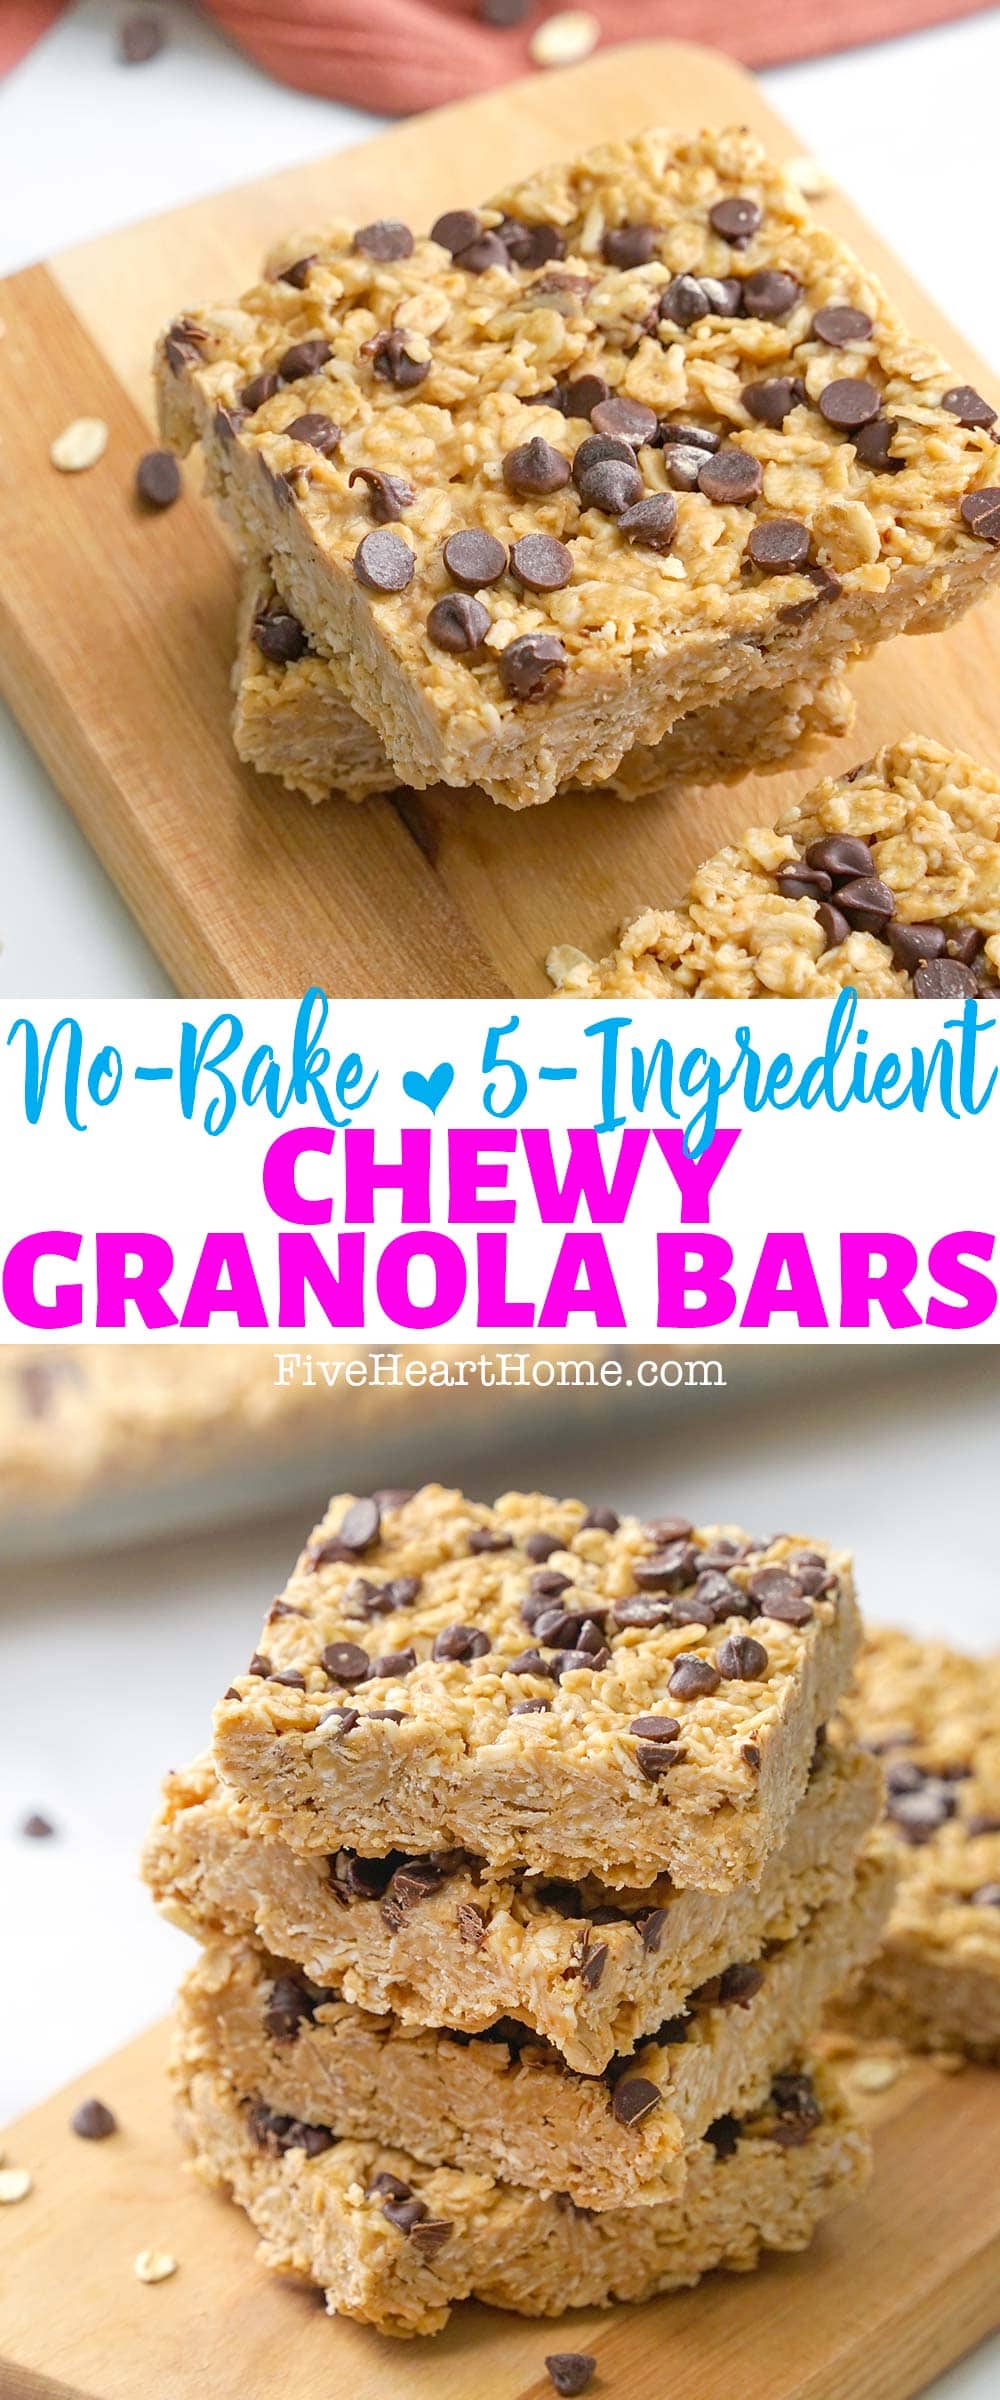 Chewy Granola Bars ~ this chewy granola bar recipe is easy to make, no-bake, and can be whipped up in a matter of minutes with just FIVE real ingredients including wholesome oats, your favorite type of nut butter, superfood coconut oil, and honey as a natural sweetener! | FiveHeartHome.com via @fivehearthome